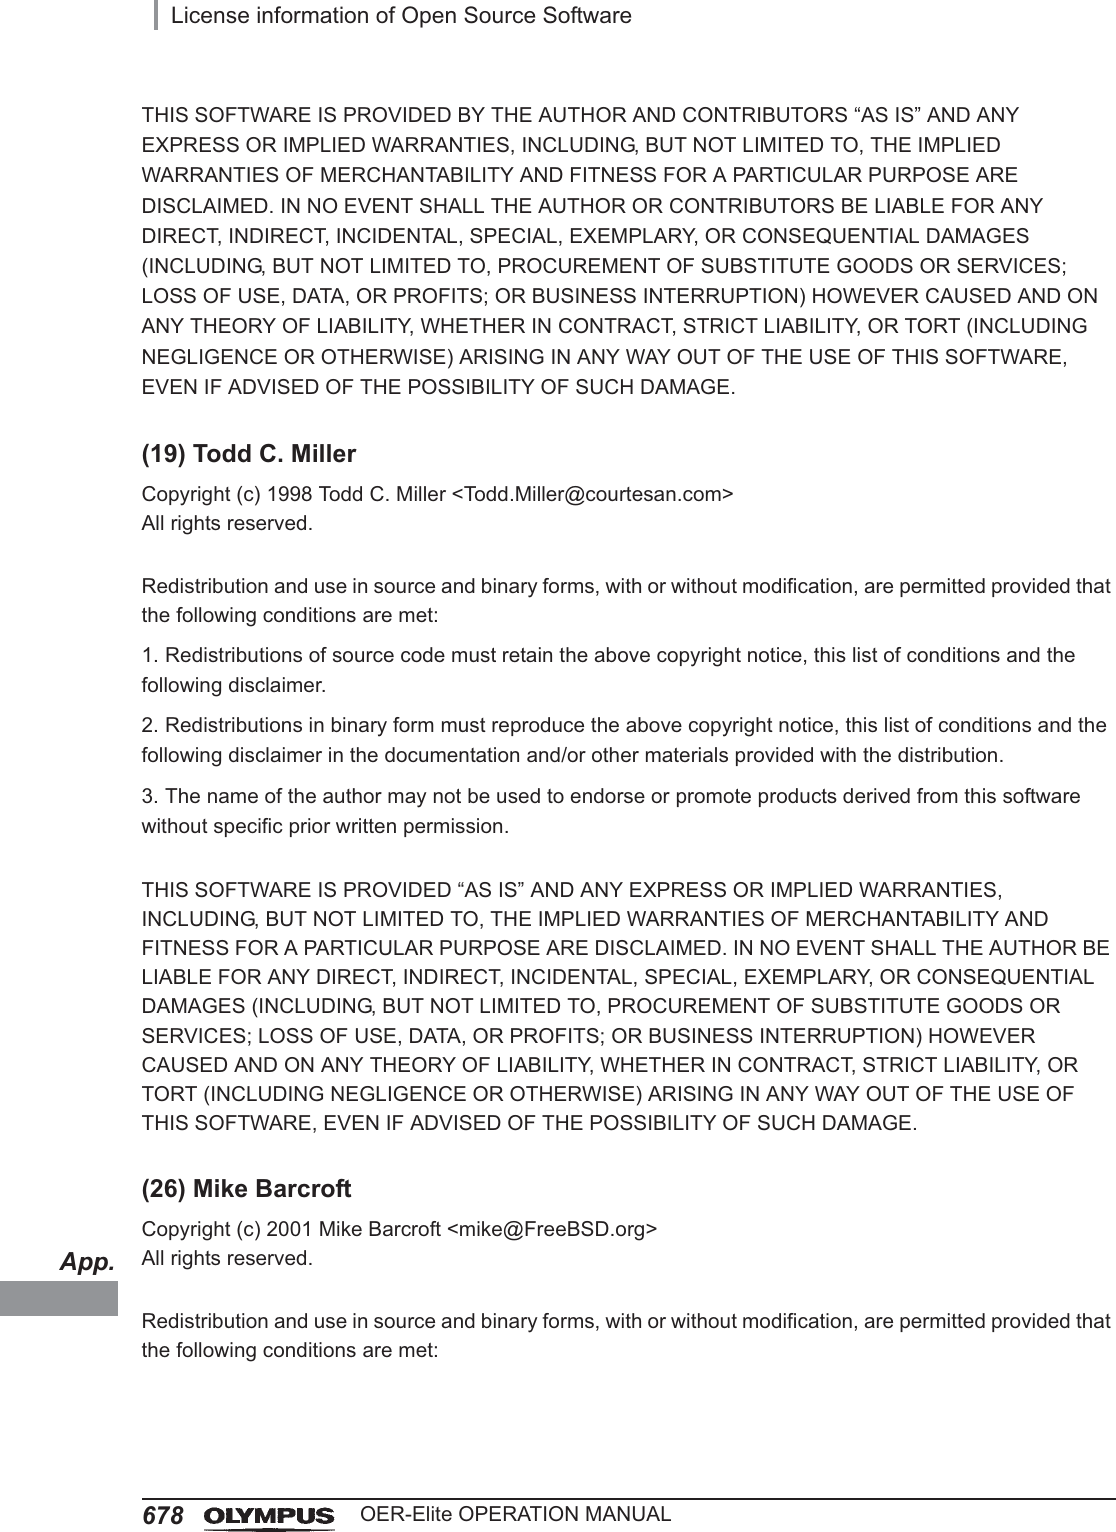 App.678License information of Open Source SoftwareOER-Elite OPERATION MANUALTHIS SOFTWARE IS PROVIDED BY THE AUTHOR AND CONTRIBUTORS “AS IS” AND ANY EXPRESS OR IMPLIED WARRANTIES, INCLUDING, BUT NOT LIMITED TO, THE IMPLIED WARRANTIES OF MERCHANTABILITY AND FITNESS FOR A PARTICULAR PURPOSE ARE DISCLAIMED. IN NO EVENT SHALL THE AUTHOR OR CONTRIBUTORS BE LIABLE FOR ANY DIRECT, INDIRECT, INCIDENTAL, SPECIAL, EXEMPLARY, OR CONSEQUENTIAL DAMAGES (INCLUDING, BUT NOT LIMITED TO, PROCUREMENT OF SUBSTITUTE GOODS OR SERVICES; LOSS OF USE, DATA, OR PROFITS; OR BUSINESS INTERRUPTION) HOWEVER CAUSED AND ON ANY THEORY OF LIABILITY, WHETHER IN CONTRACT, STRICT LIABILITY, OR TORT (INCLUDING NEGLIGENCE OR OTHERWISE) ARISING IN ANY WAY OUT OF THE USE OF THIS SOFTWARE, EVEN IF ADVISED OF THE POSSIBILITY OF SUCH DAMAGE.(19) Todd C. MillerCopyright (c) 1998 Todd C. Miller &lt;Todd.Miller@courtesan.com&gt;All rights reserved.Redistribution and use in source and binary forms, with or without modification, are permitted provided that the following conditions are met:1. Redistributions of source code must retain the above copyright notice, this list of conditions and the following disclaimer.2. Redistributions in binary form must reproduce the above copyright notice, this list of conditions and the following disclaimer in the documentation and/or other materials provided with the distribution.3. The name of the author may not be used to endorse or promote products derived from this software without specific prior written permission.THIS SOFTWARE IS PROVIDED “AS IS” AND ANY EXPRESS OR IMPLIED WARRANTIES, INCLUDING, BUT NOT LIMITED TO, THE IMPLIED WARRANTIES OF MERCHANTABILITY AND FITNESS FOR A PARTICULAR PURPOSE ARE DISCLAIMED. IN NO EVENT SHALL THE AUTHOR BE LIABLE FOR ANY DIRECT, INDIRECT, INCIDENTAL, SPECIAL, EXEMPLARY, OR CONSEQUENTIAL DAMAGES (INCLUDING, BUT NOT LIMITED TO, PROCUREMENT OF SUBSTITUTE GOODS OR SERVICES; LOSS OF USE, DATA, OR PROFITS; OR BUSINESS INTERRUPTION) HOWEVER CAUSED AND ON ANY THEORY OF LIABILITY, WHETHER IN CONTRACT, STRICT LIABILITY, OR TORT (INCLUDING NEGLIGENCE OR OTHERWISE) ARISING IN ANY WAY OUT OF THE USE OF THIS SOFTWARE, EVEN IF ADVISED OF THE POSSIBILITY OF SUCH DAMAGE.(26) Mike BarcroftCopyright (c) 2001 Mike Barcroft &lt;mike@FreeBSD.org&gt;All rights reserved.Redistribution and use in source and binary forms, with or without modification, are permitted provided that the following conditions are met: